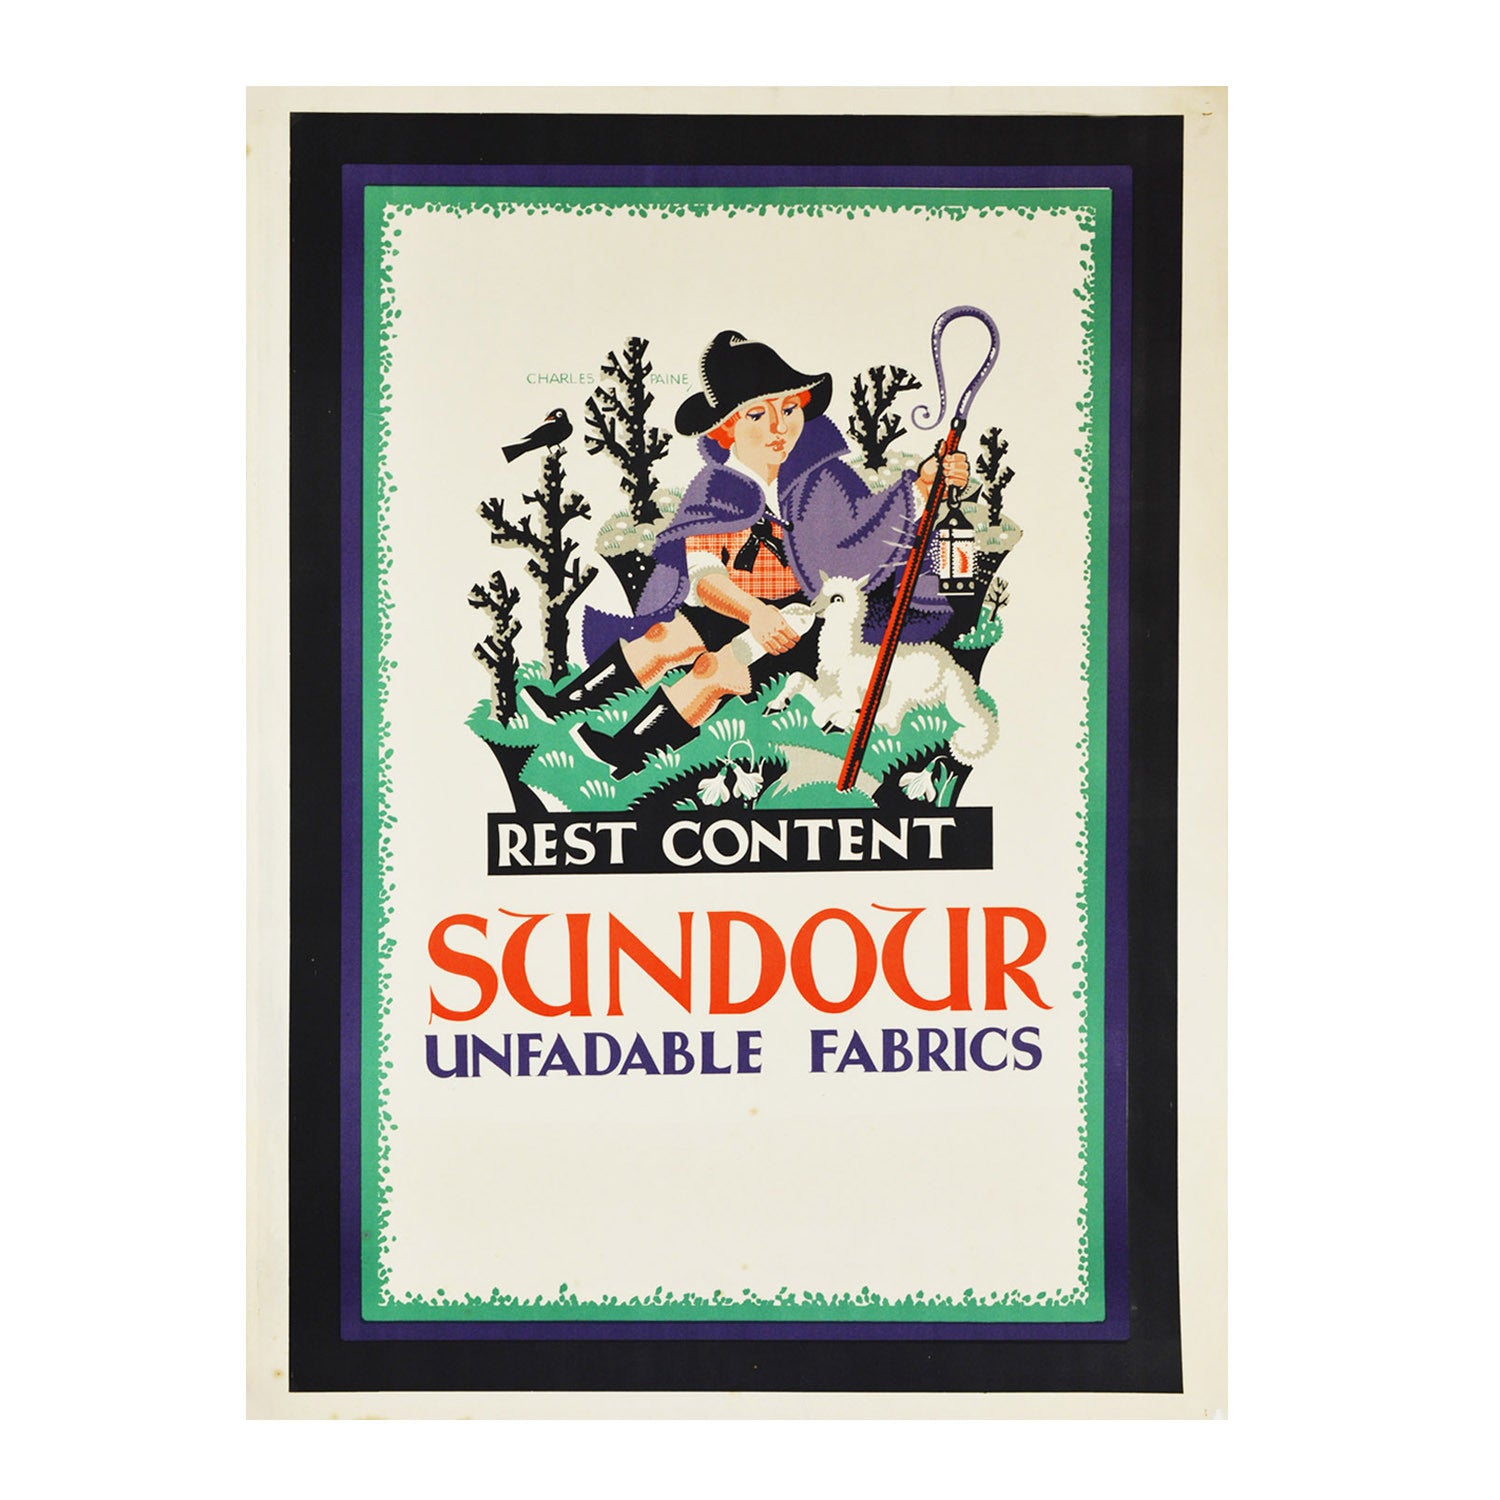 An original 1920s poster for Sundour fabrics by Charles Paine showing shepherdess with a lamb